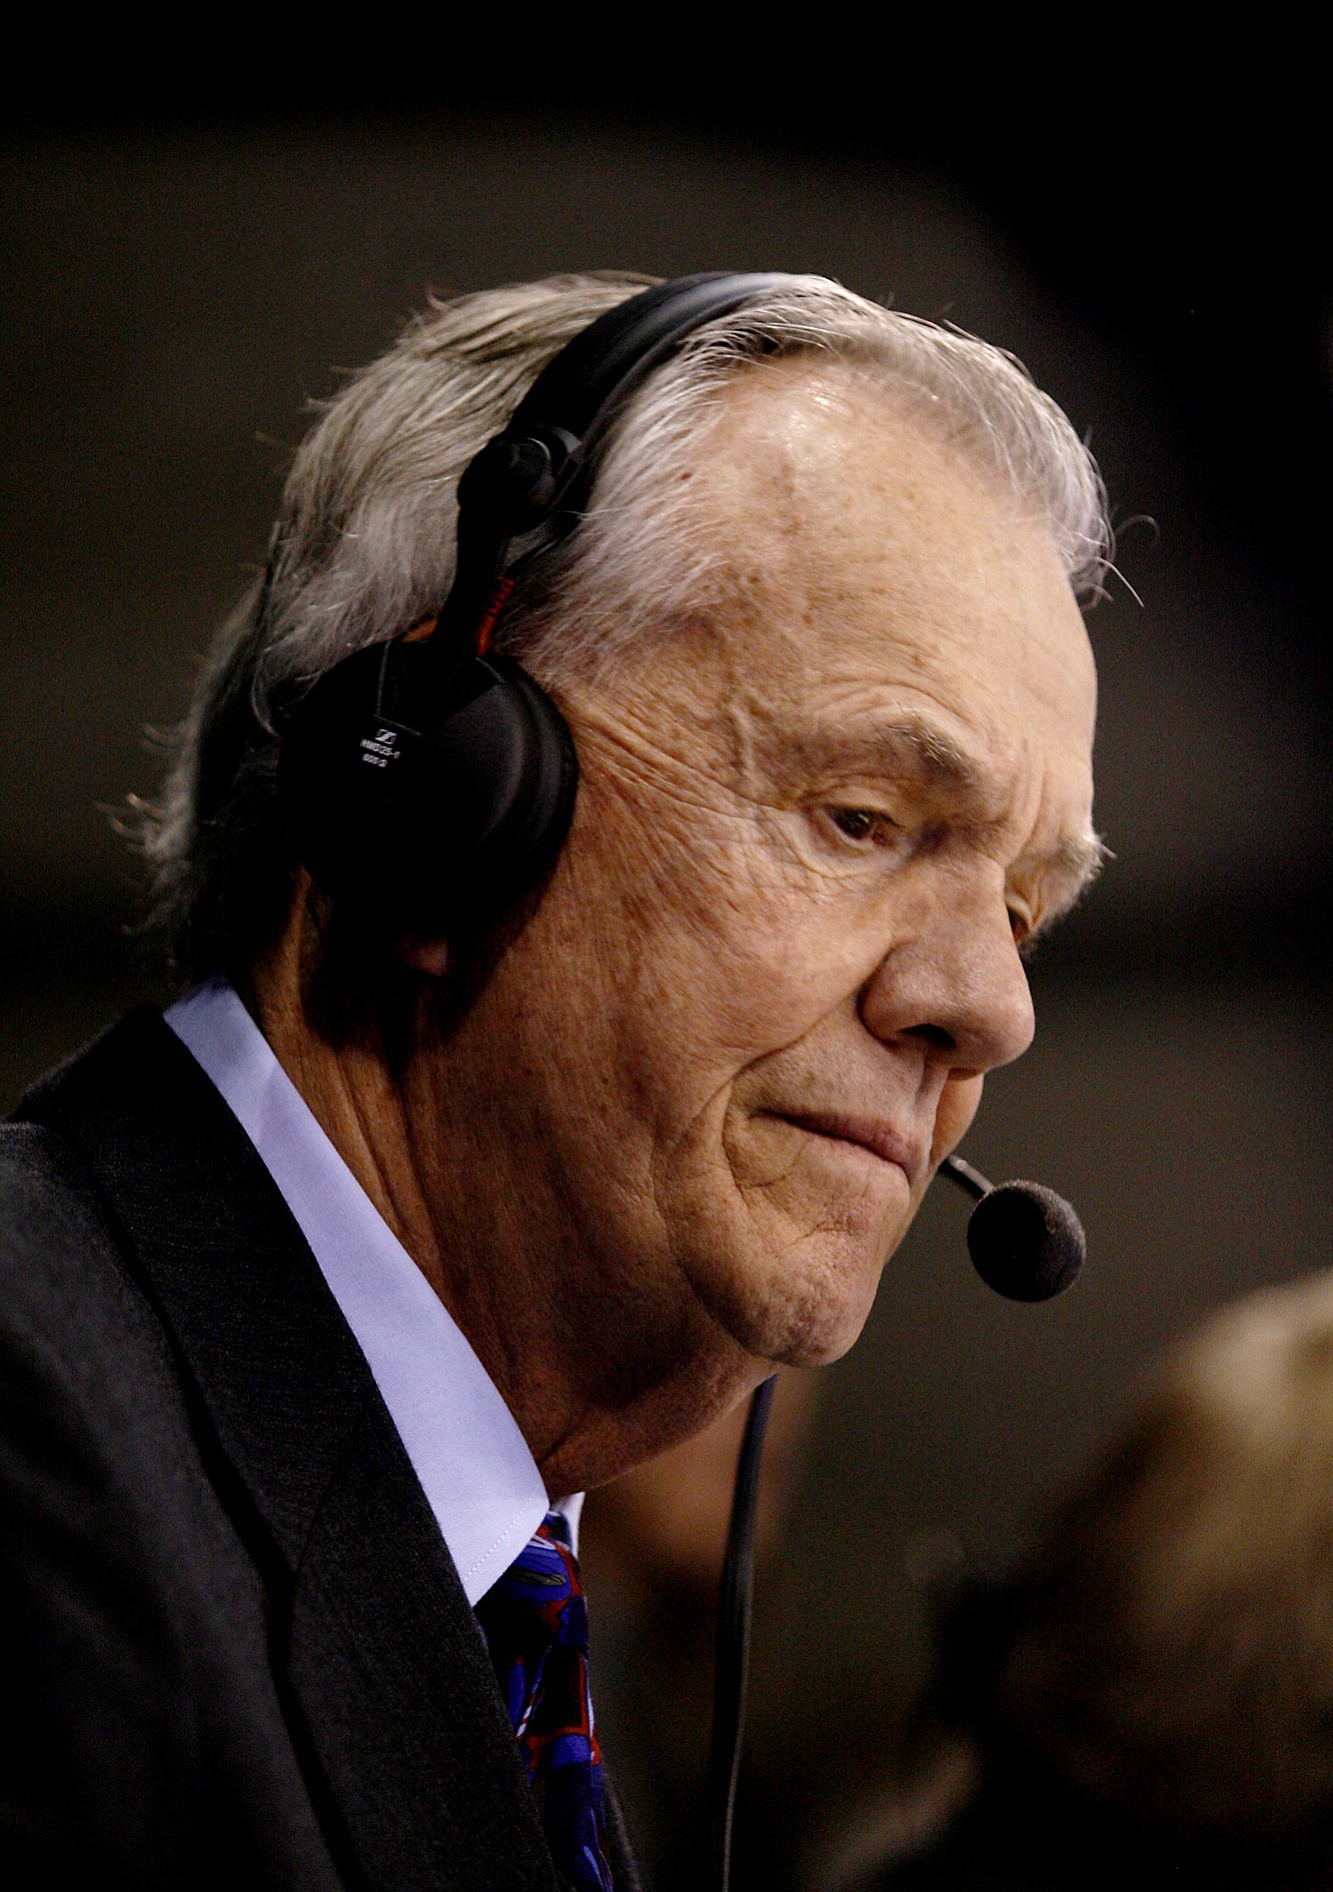 In this Jan. 7, 2009, file photo, Utah Jazz broadcaster Rod Hundley prepares for his 3,000th broadcast with the Jazz. Hundley, the former NBA player who broadcast Jazz games in New Orleans and Utah for 35 years, died Friday, March 27, 2015. He was 80. The Jazz said Hundley died at his home in the Phoenix area. (AP Photo/Steve C.